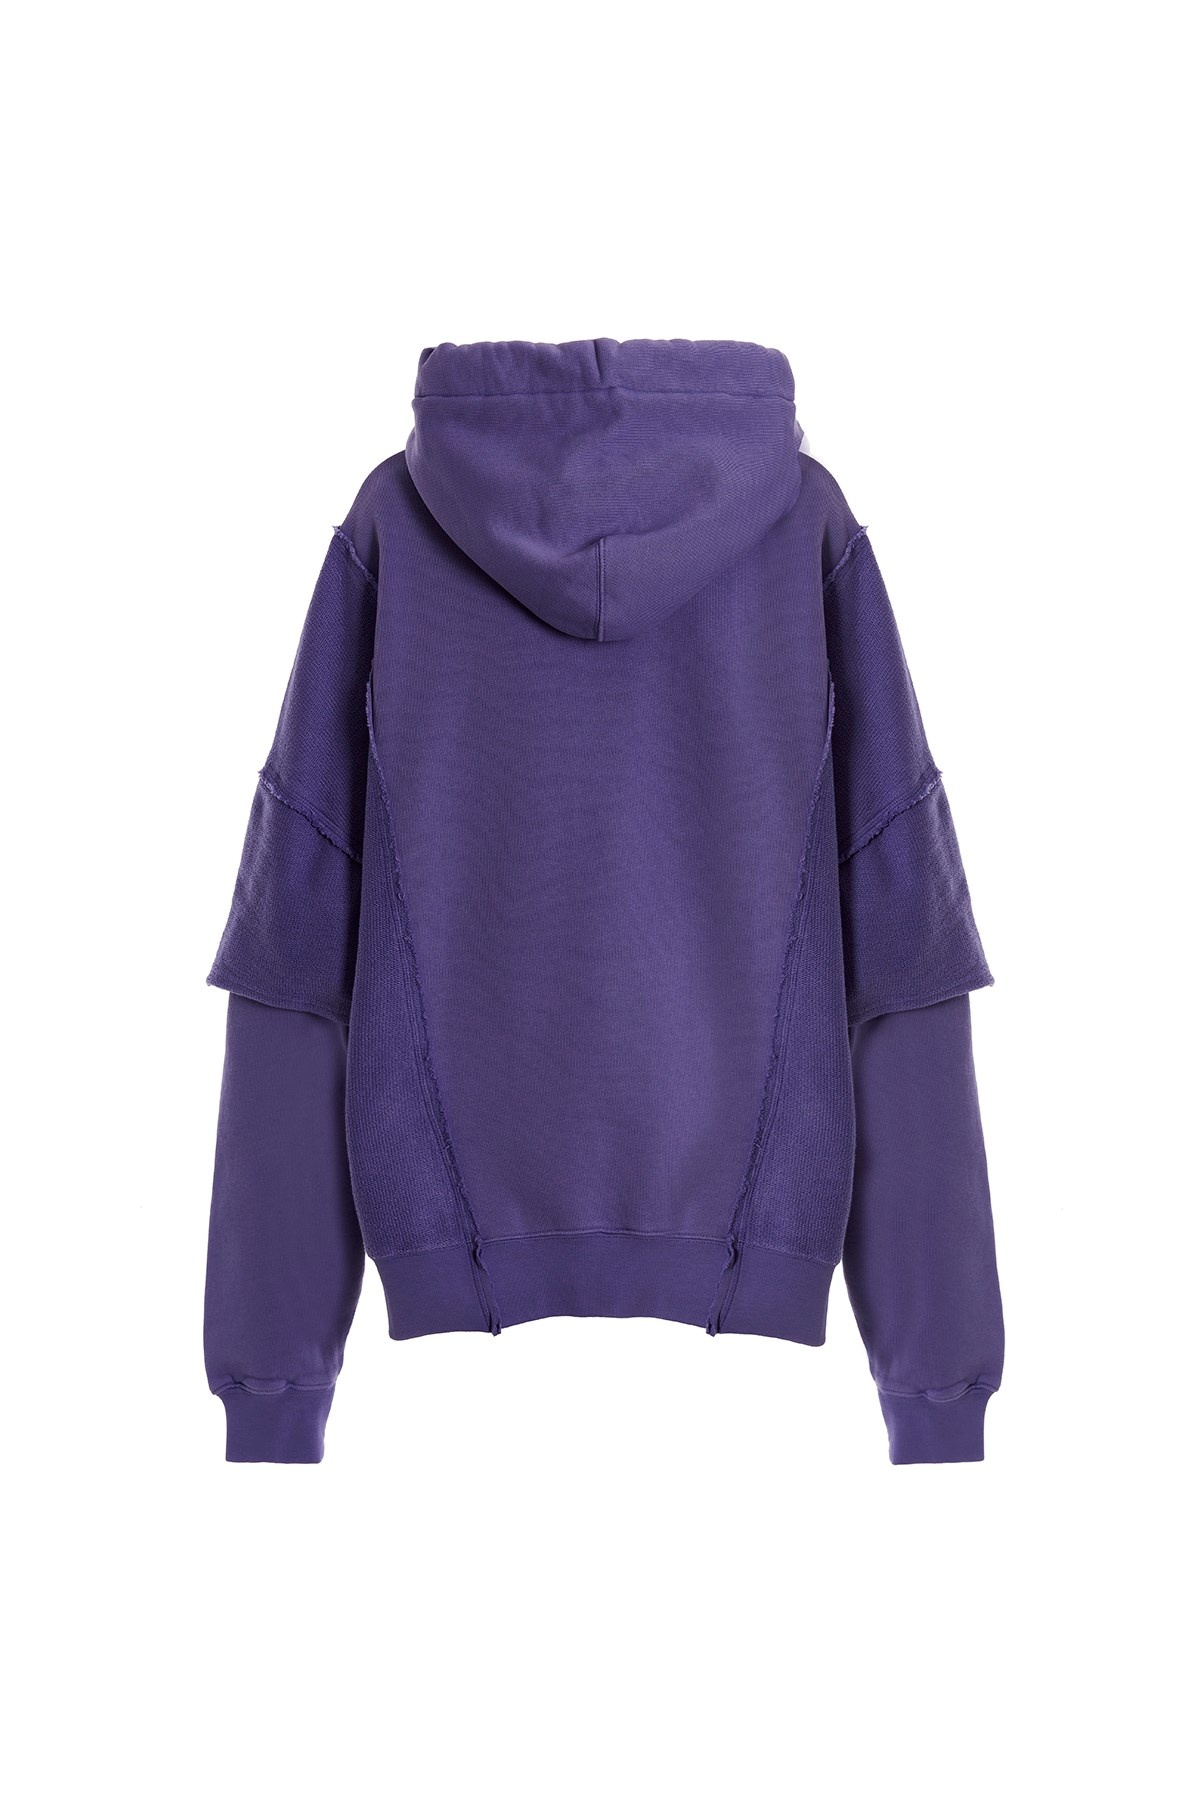 'Double Pockets' hoodie - 2